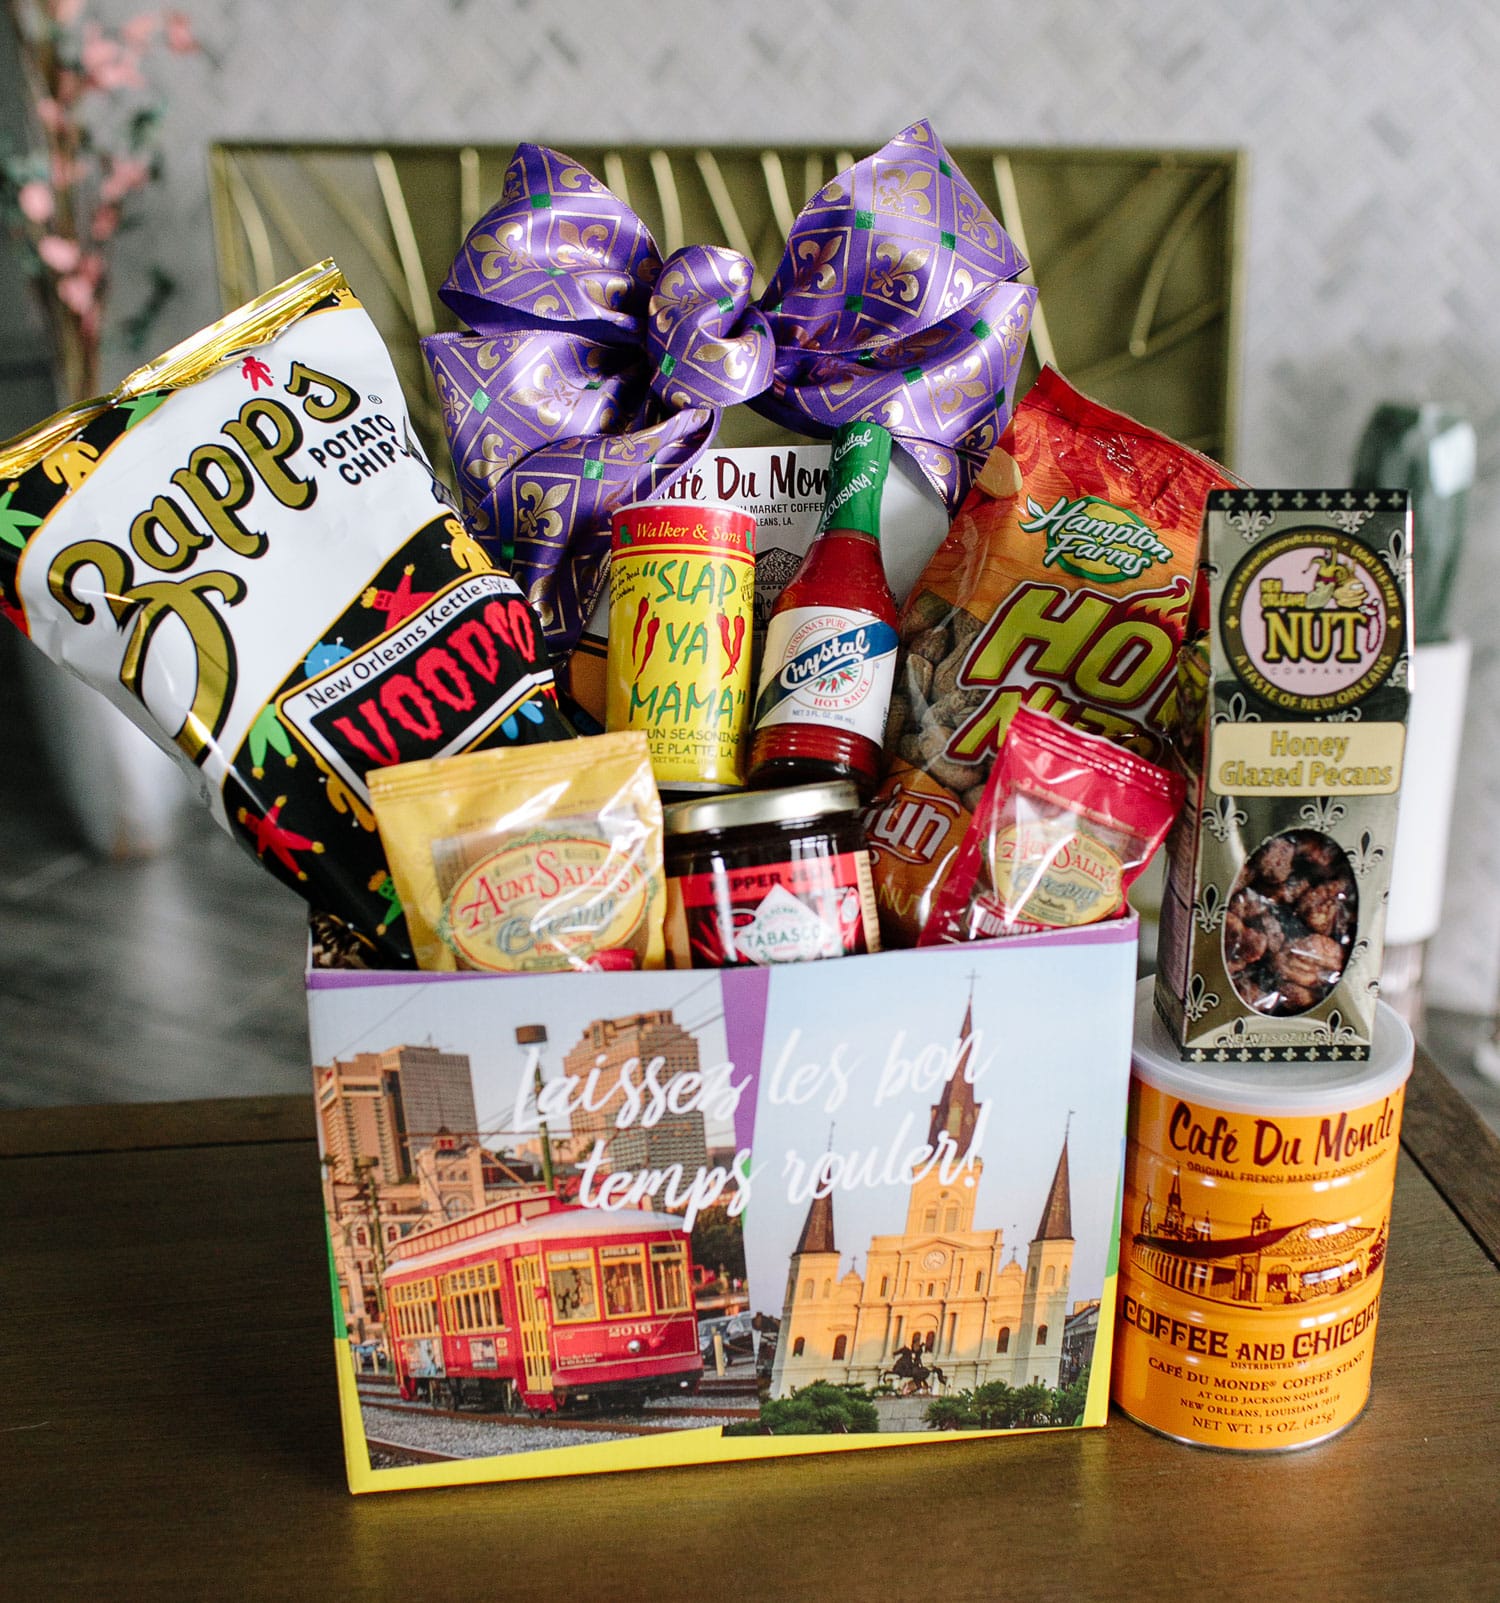 cafe du mond coffee and beinet, zapps, seasoning, gumbo mix and hot sauce presented in new orleans gift box